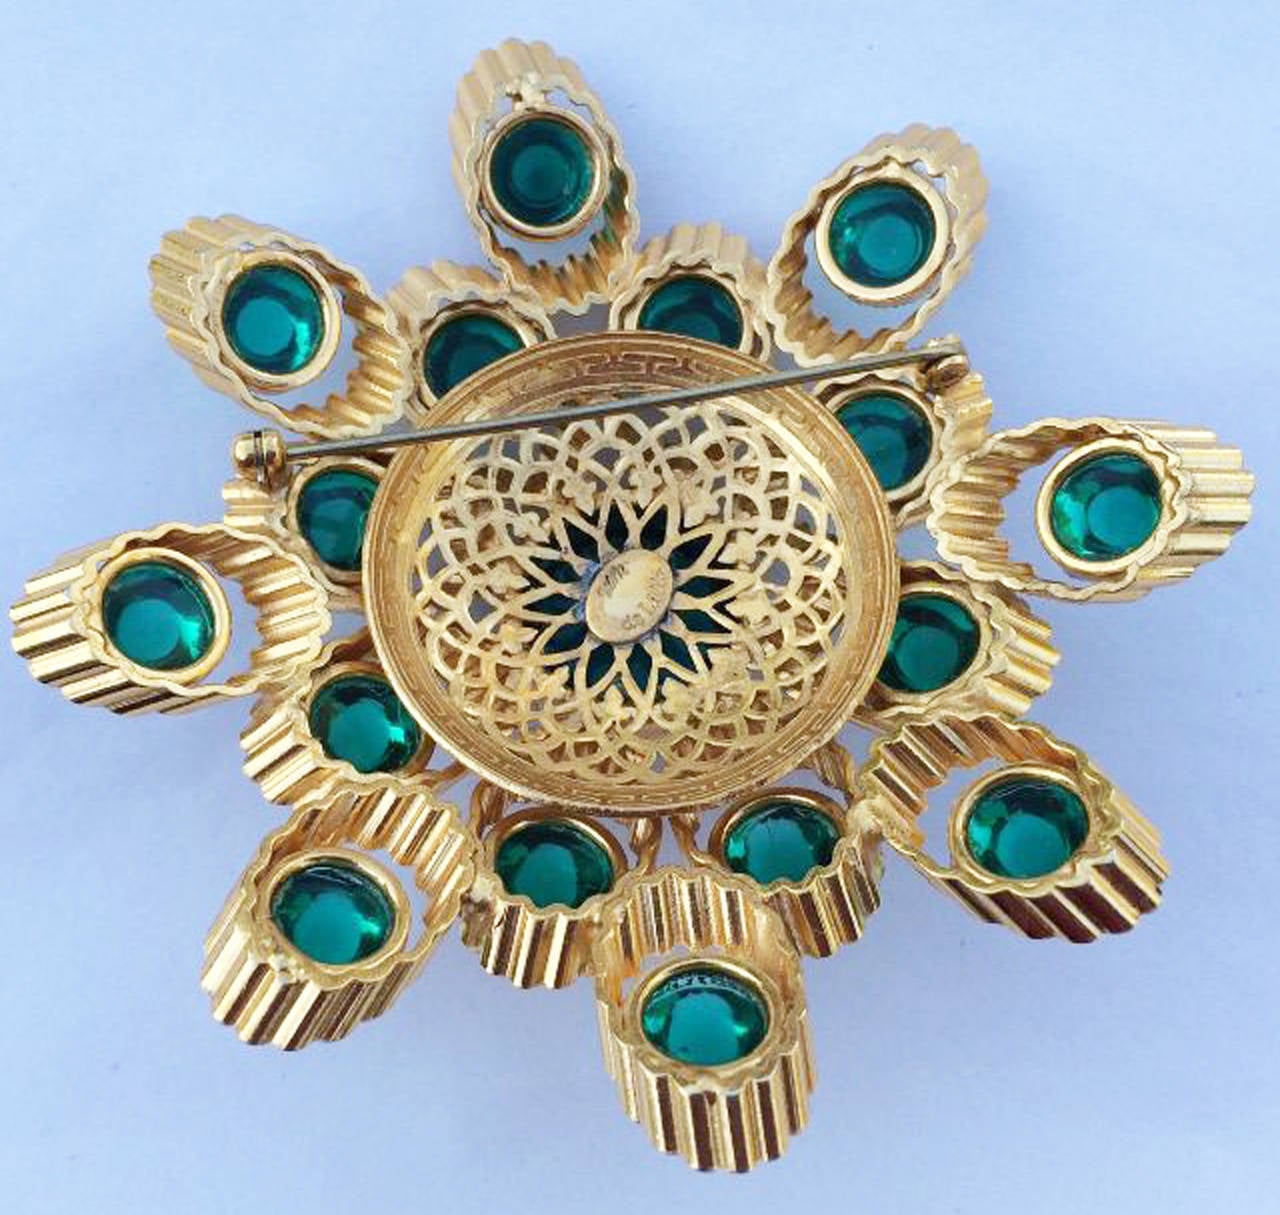 A fine and rare vintage William de Lillo brooch. Signed sculpted gilt metal item features vibrant green art glass cabochon centers. Original non-produced prototype one-off item directly from the Wm de Lillo archives. Unworn.